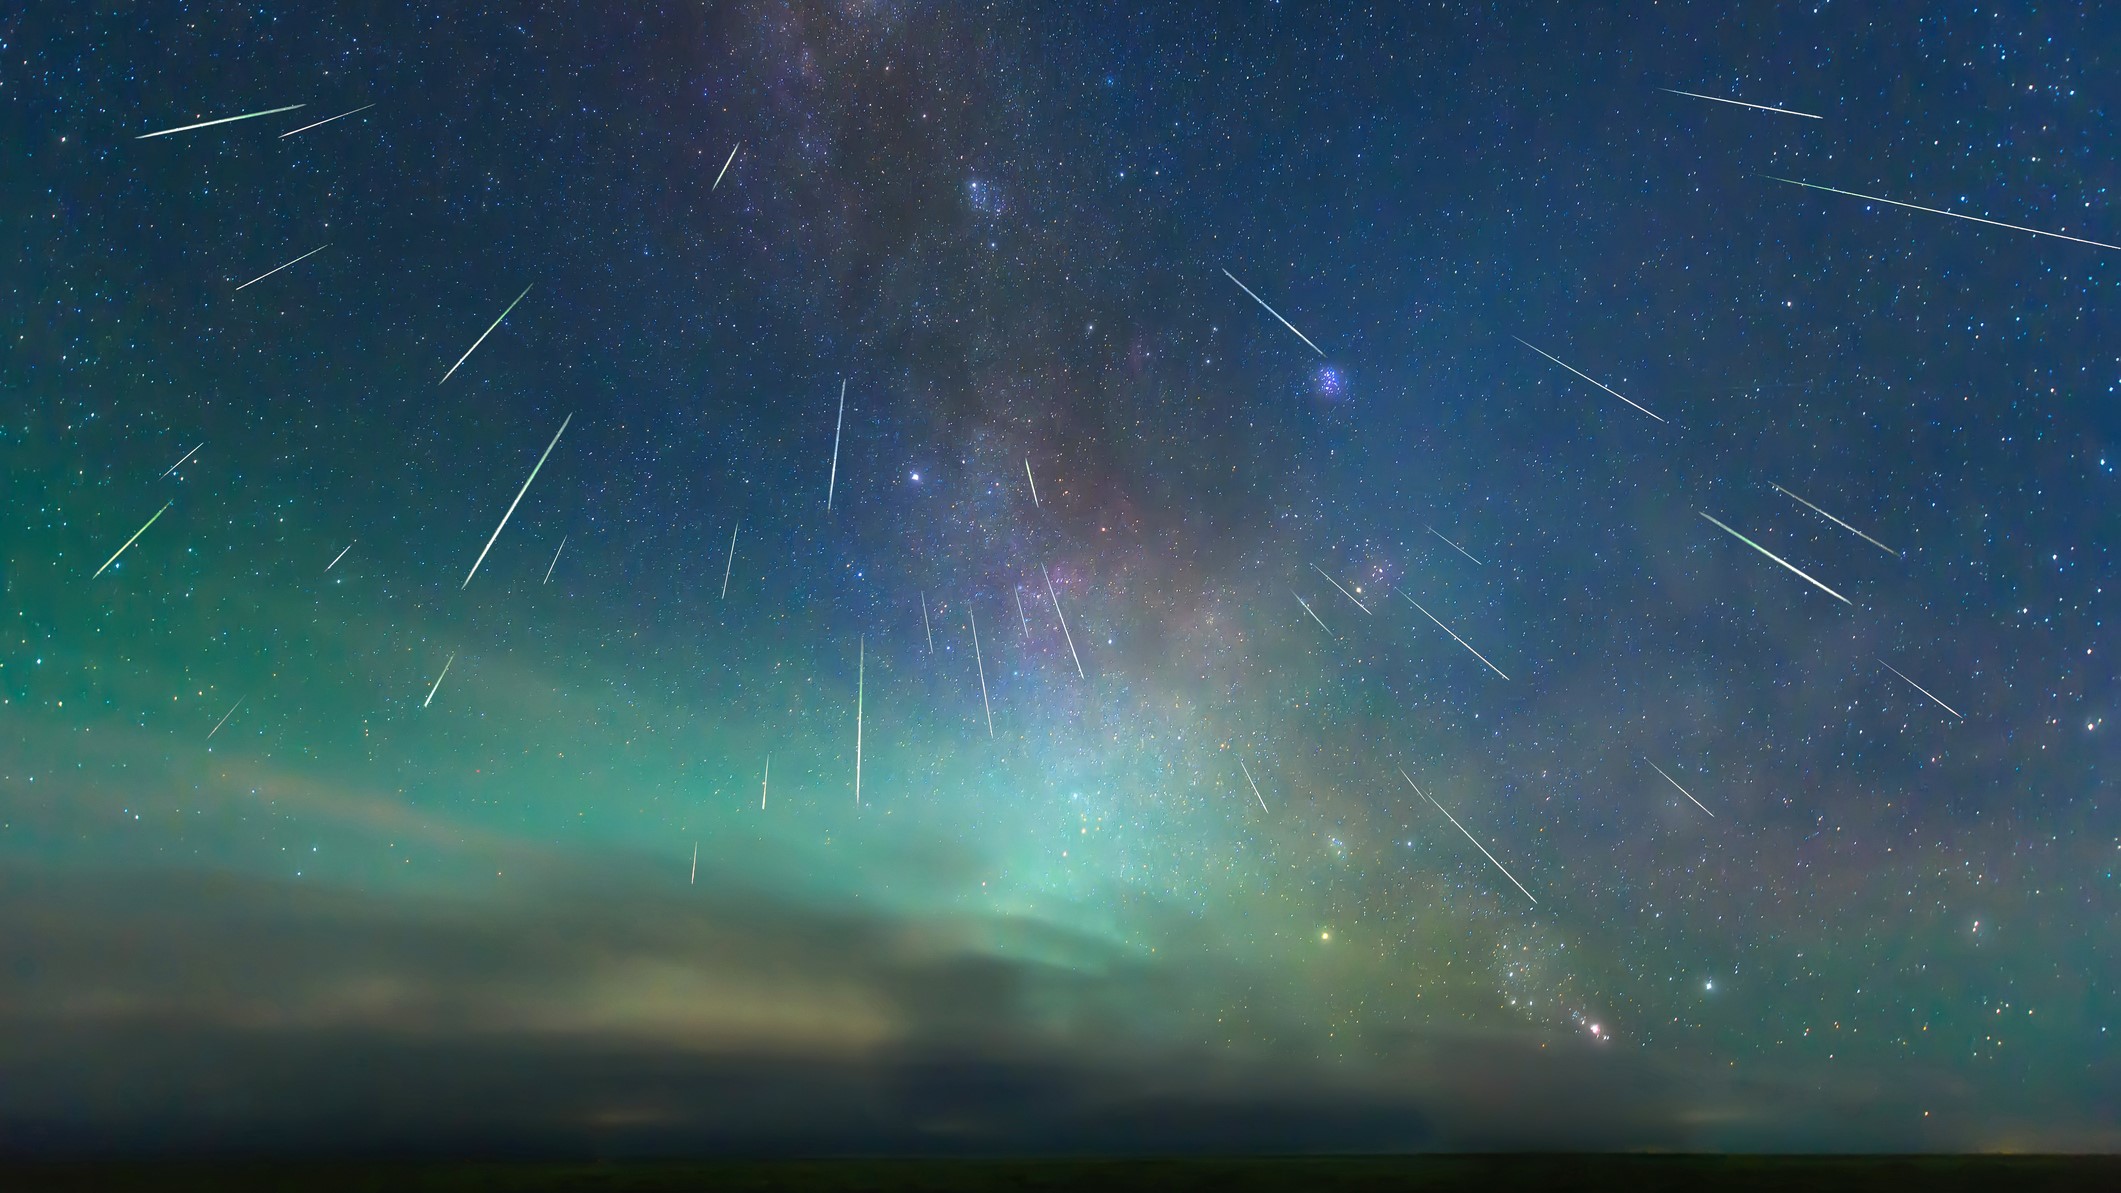 The Perseid meteor shower is a popular meteor shower. Here, the Perseids were captured on Aug. 13, 2018, Inner Mongolia, China.